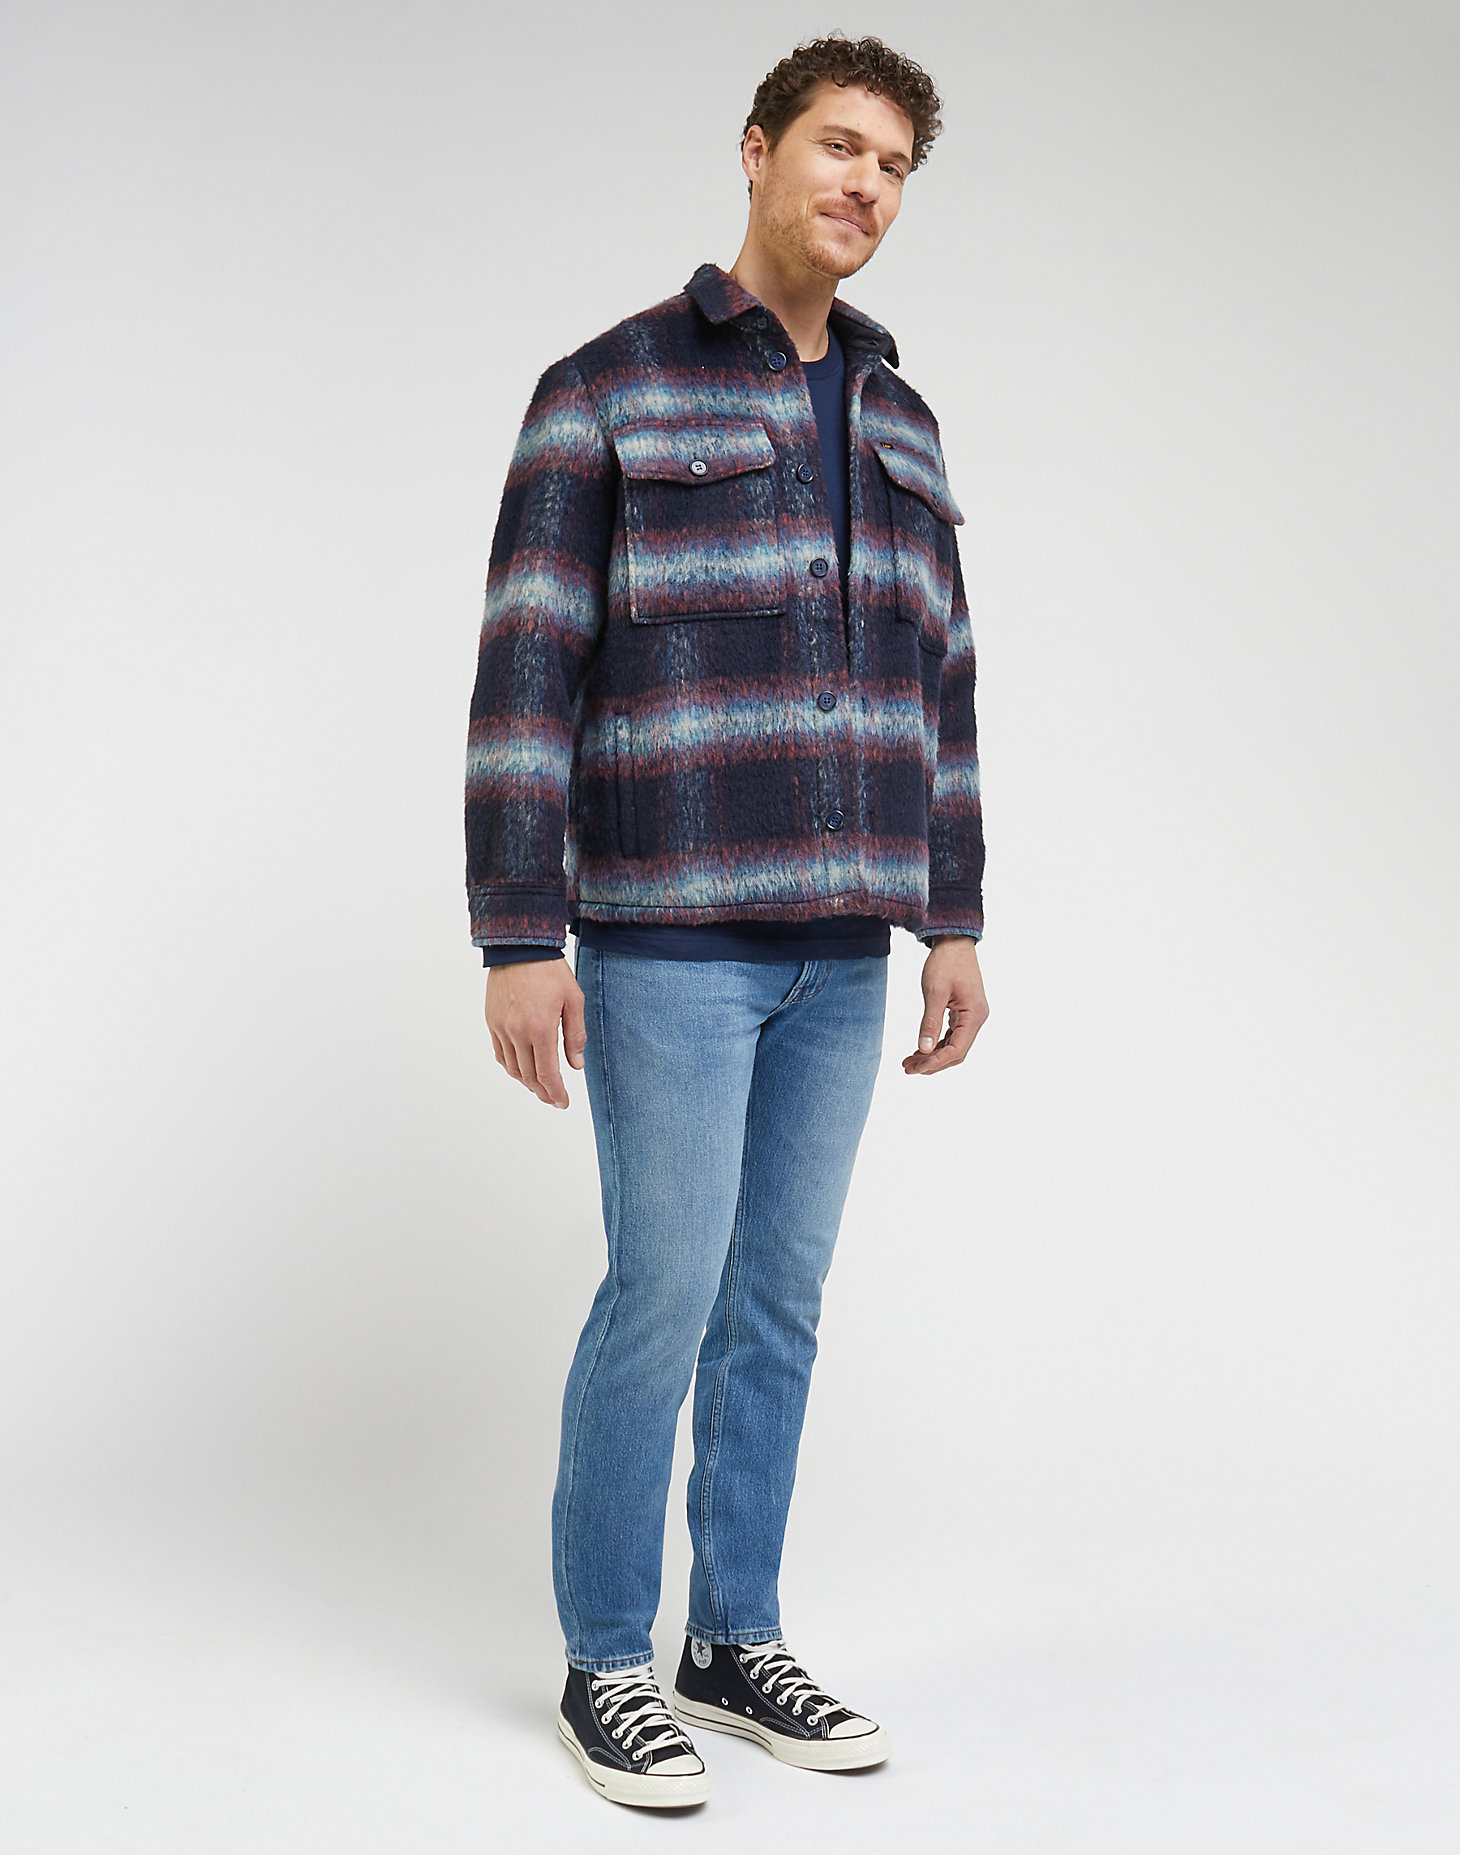 Loose Overshirt in Sky Captain alternative view 2